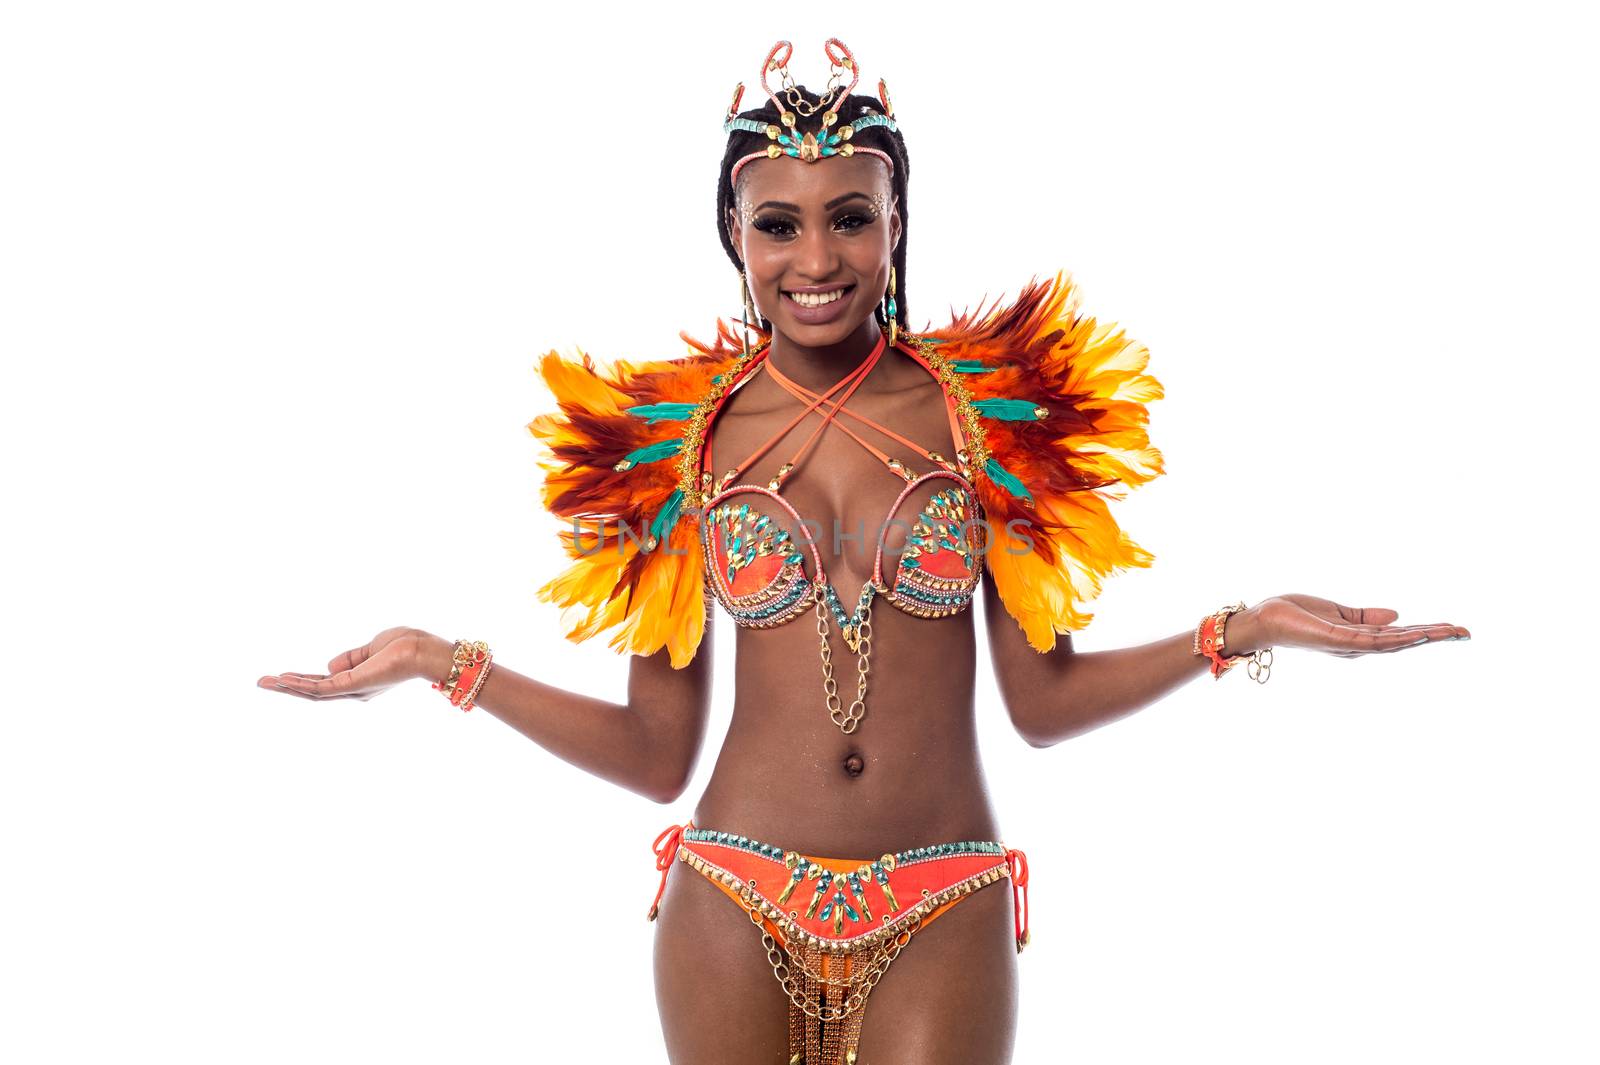 How is my new carnival costume? by stockyimages